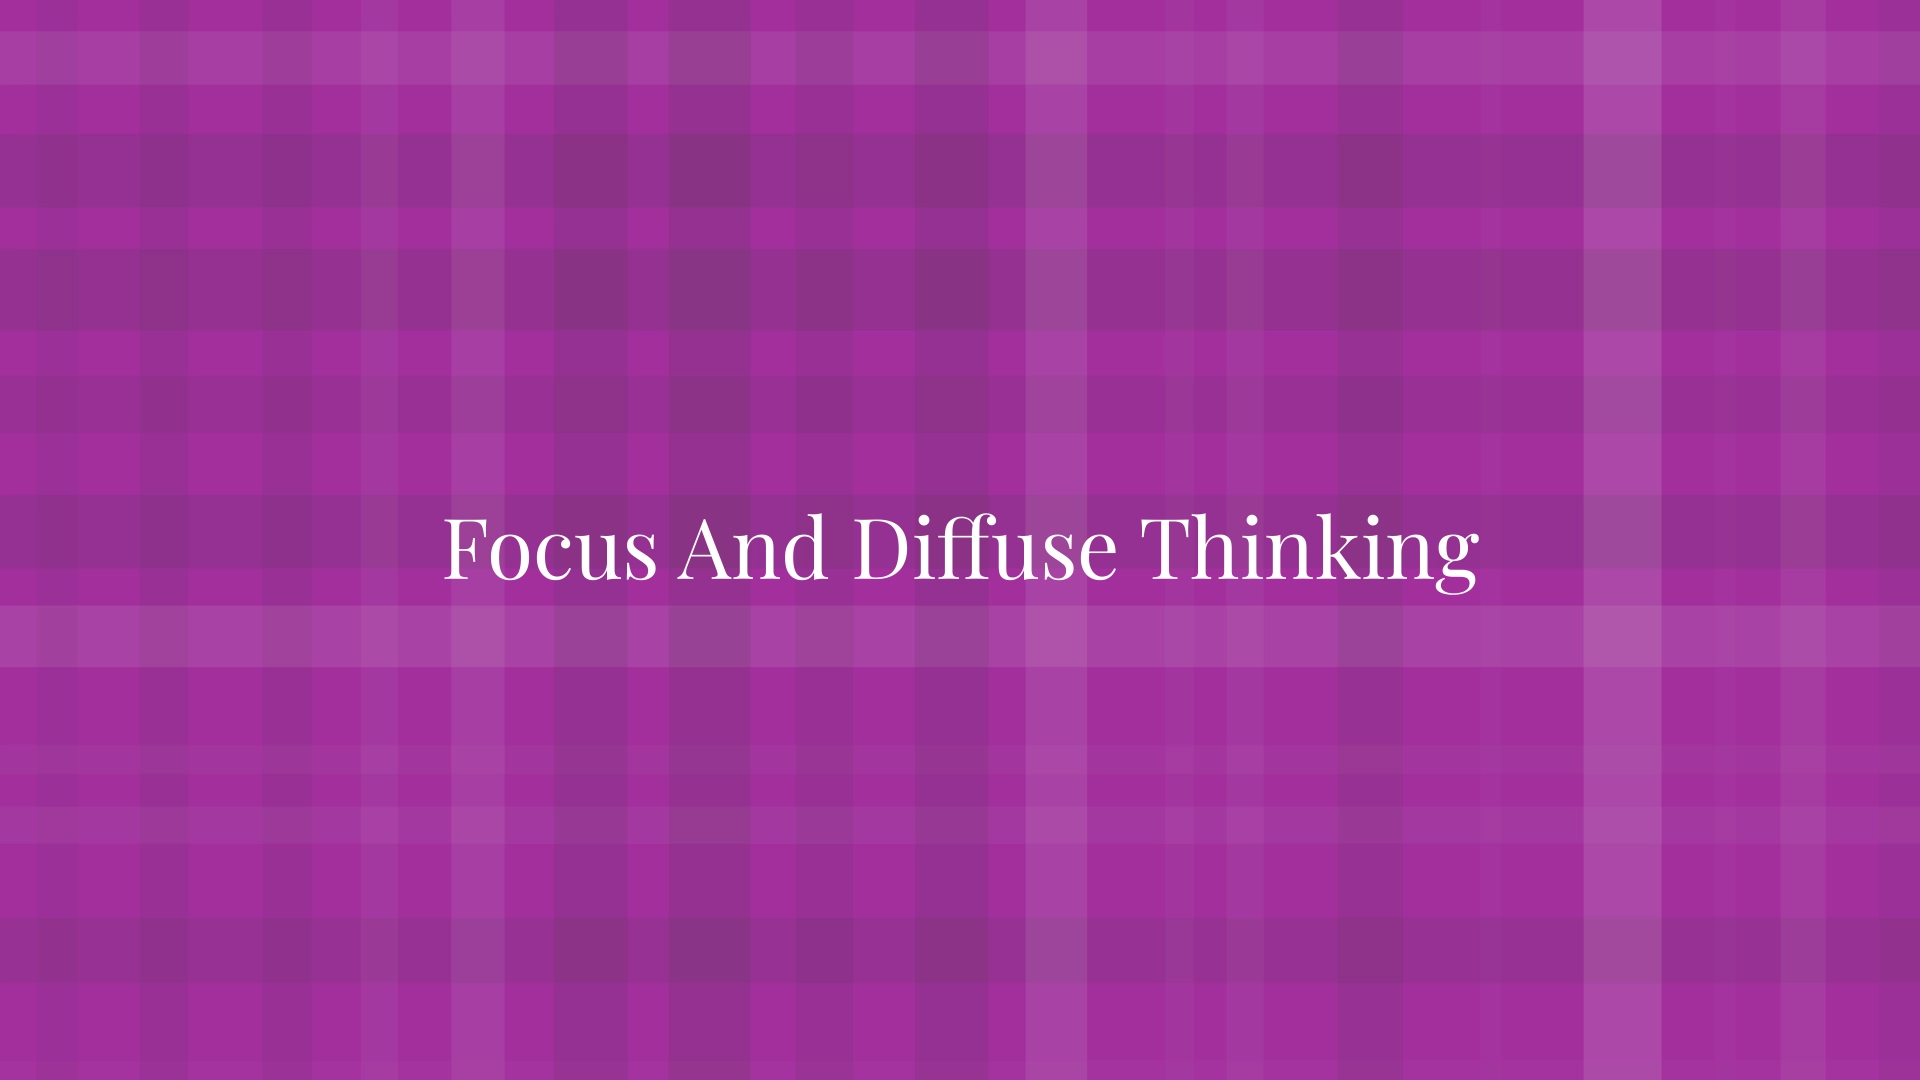 Focus And Diffuse Thinking